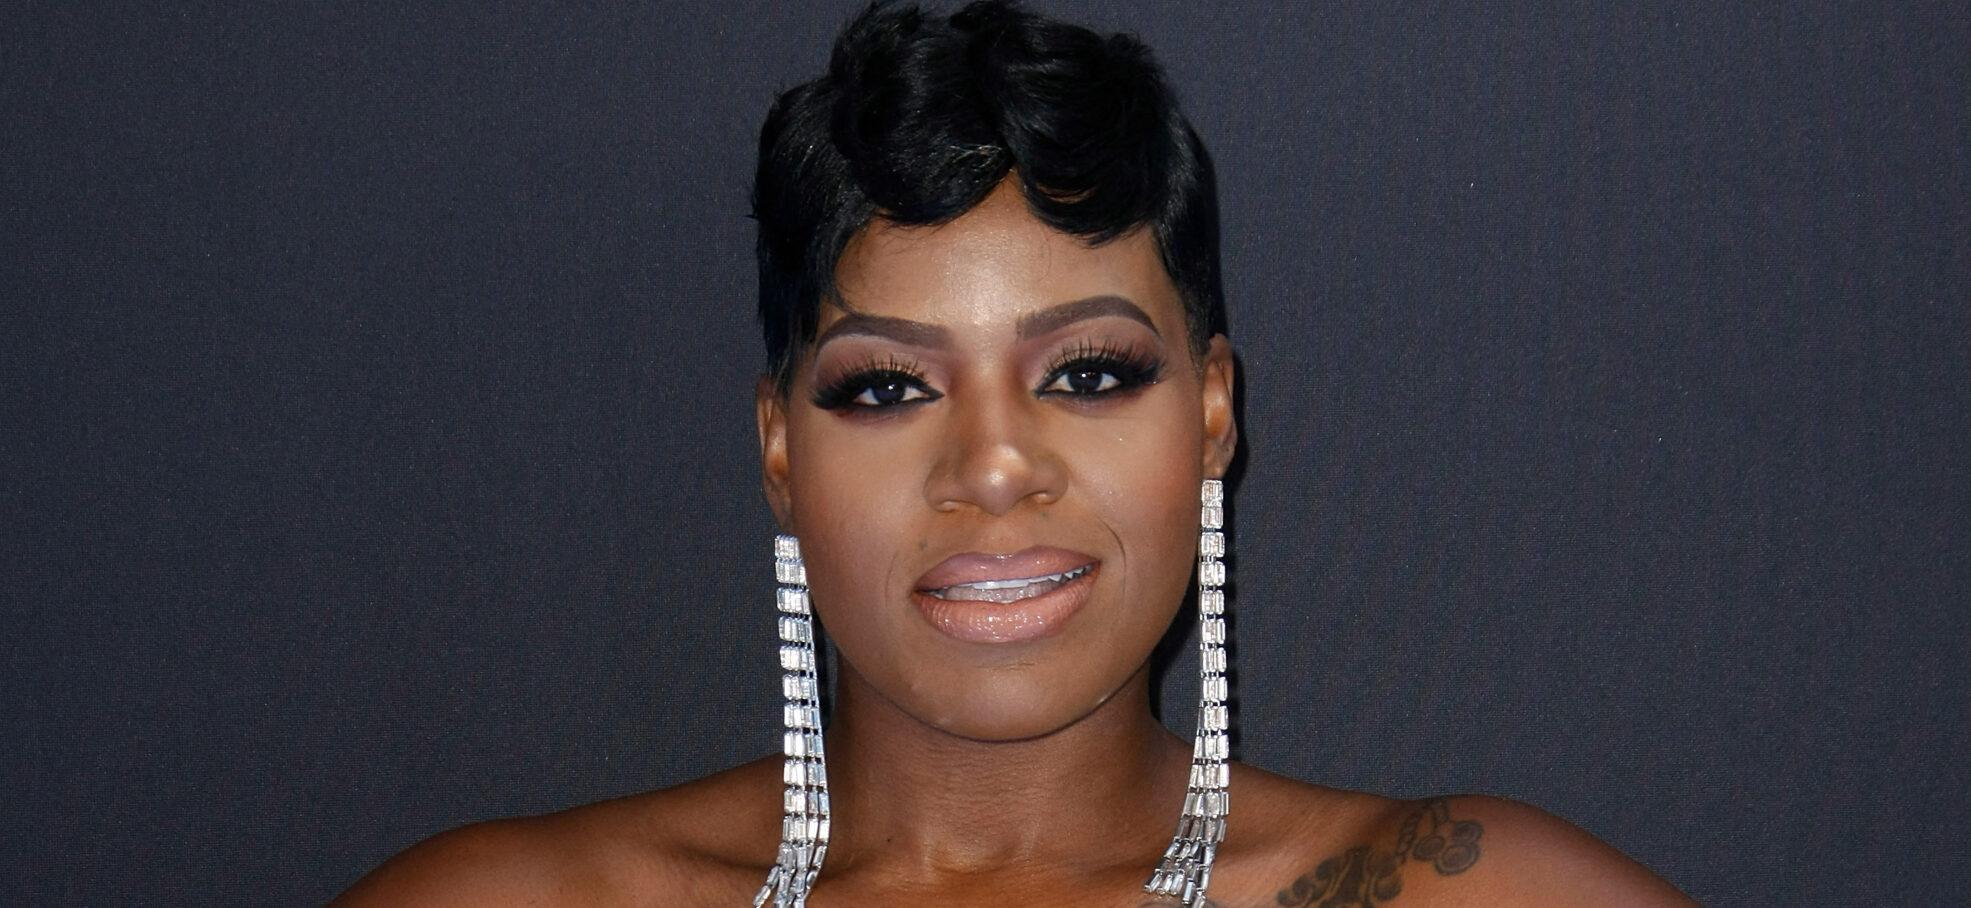 Fantasia attends the 2019 BET Awards